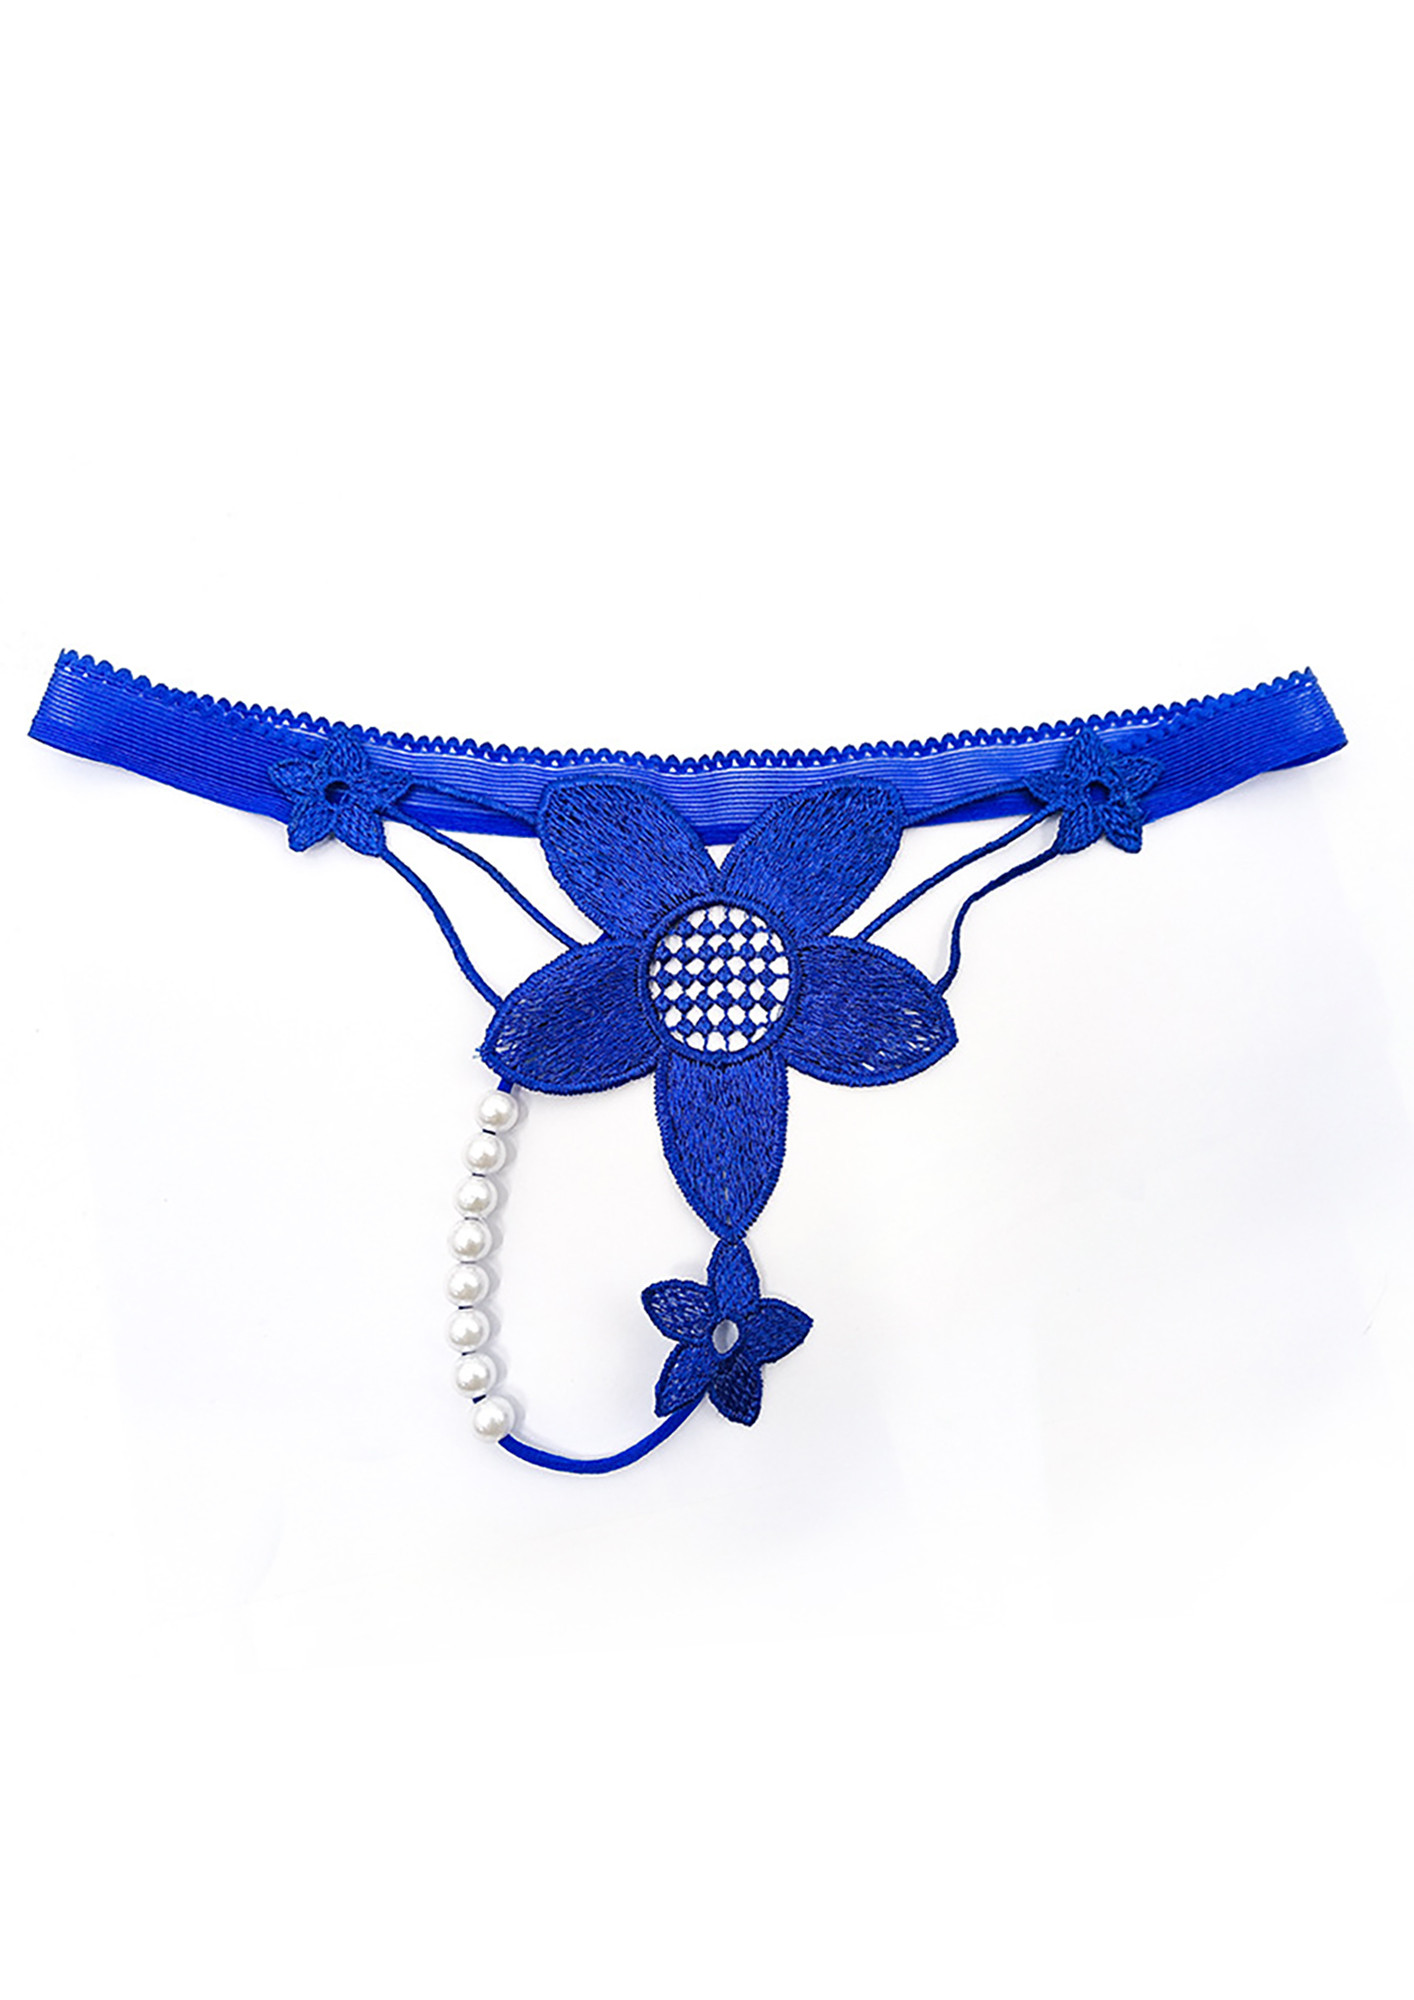 Buy Wife Thong Online In India -  India